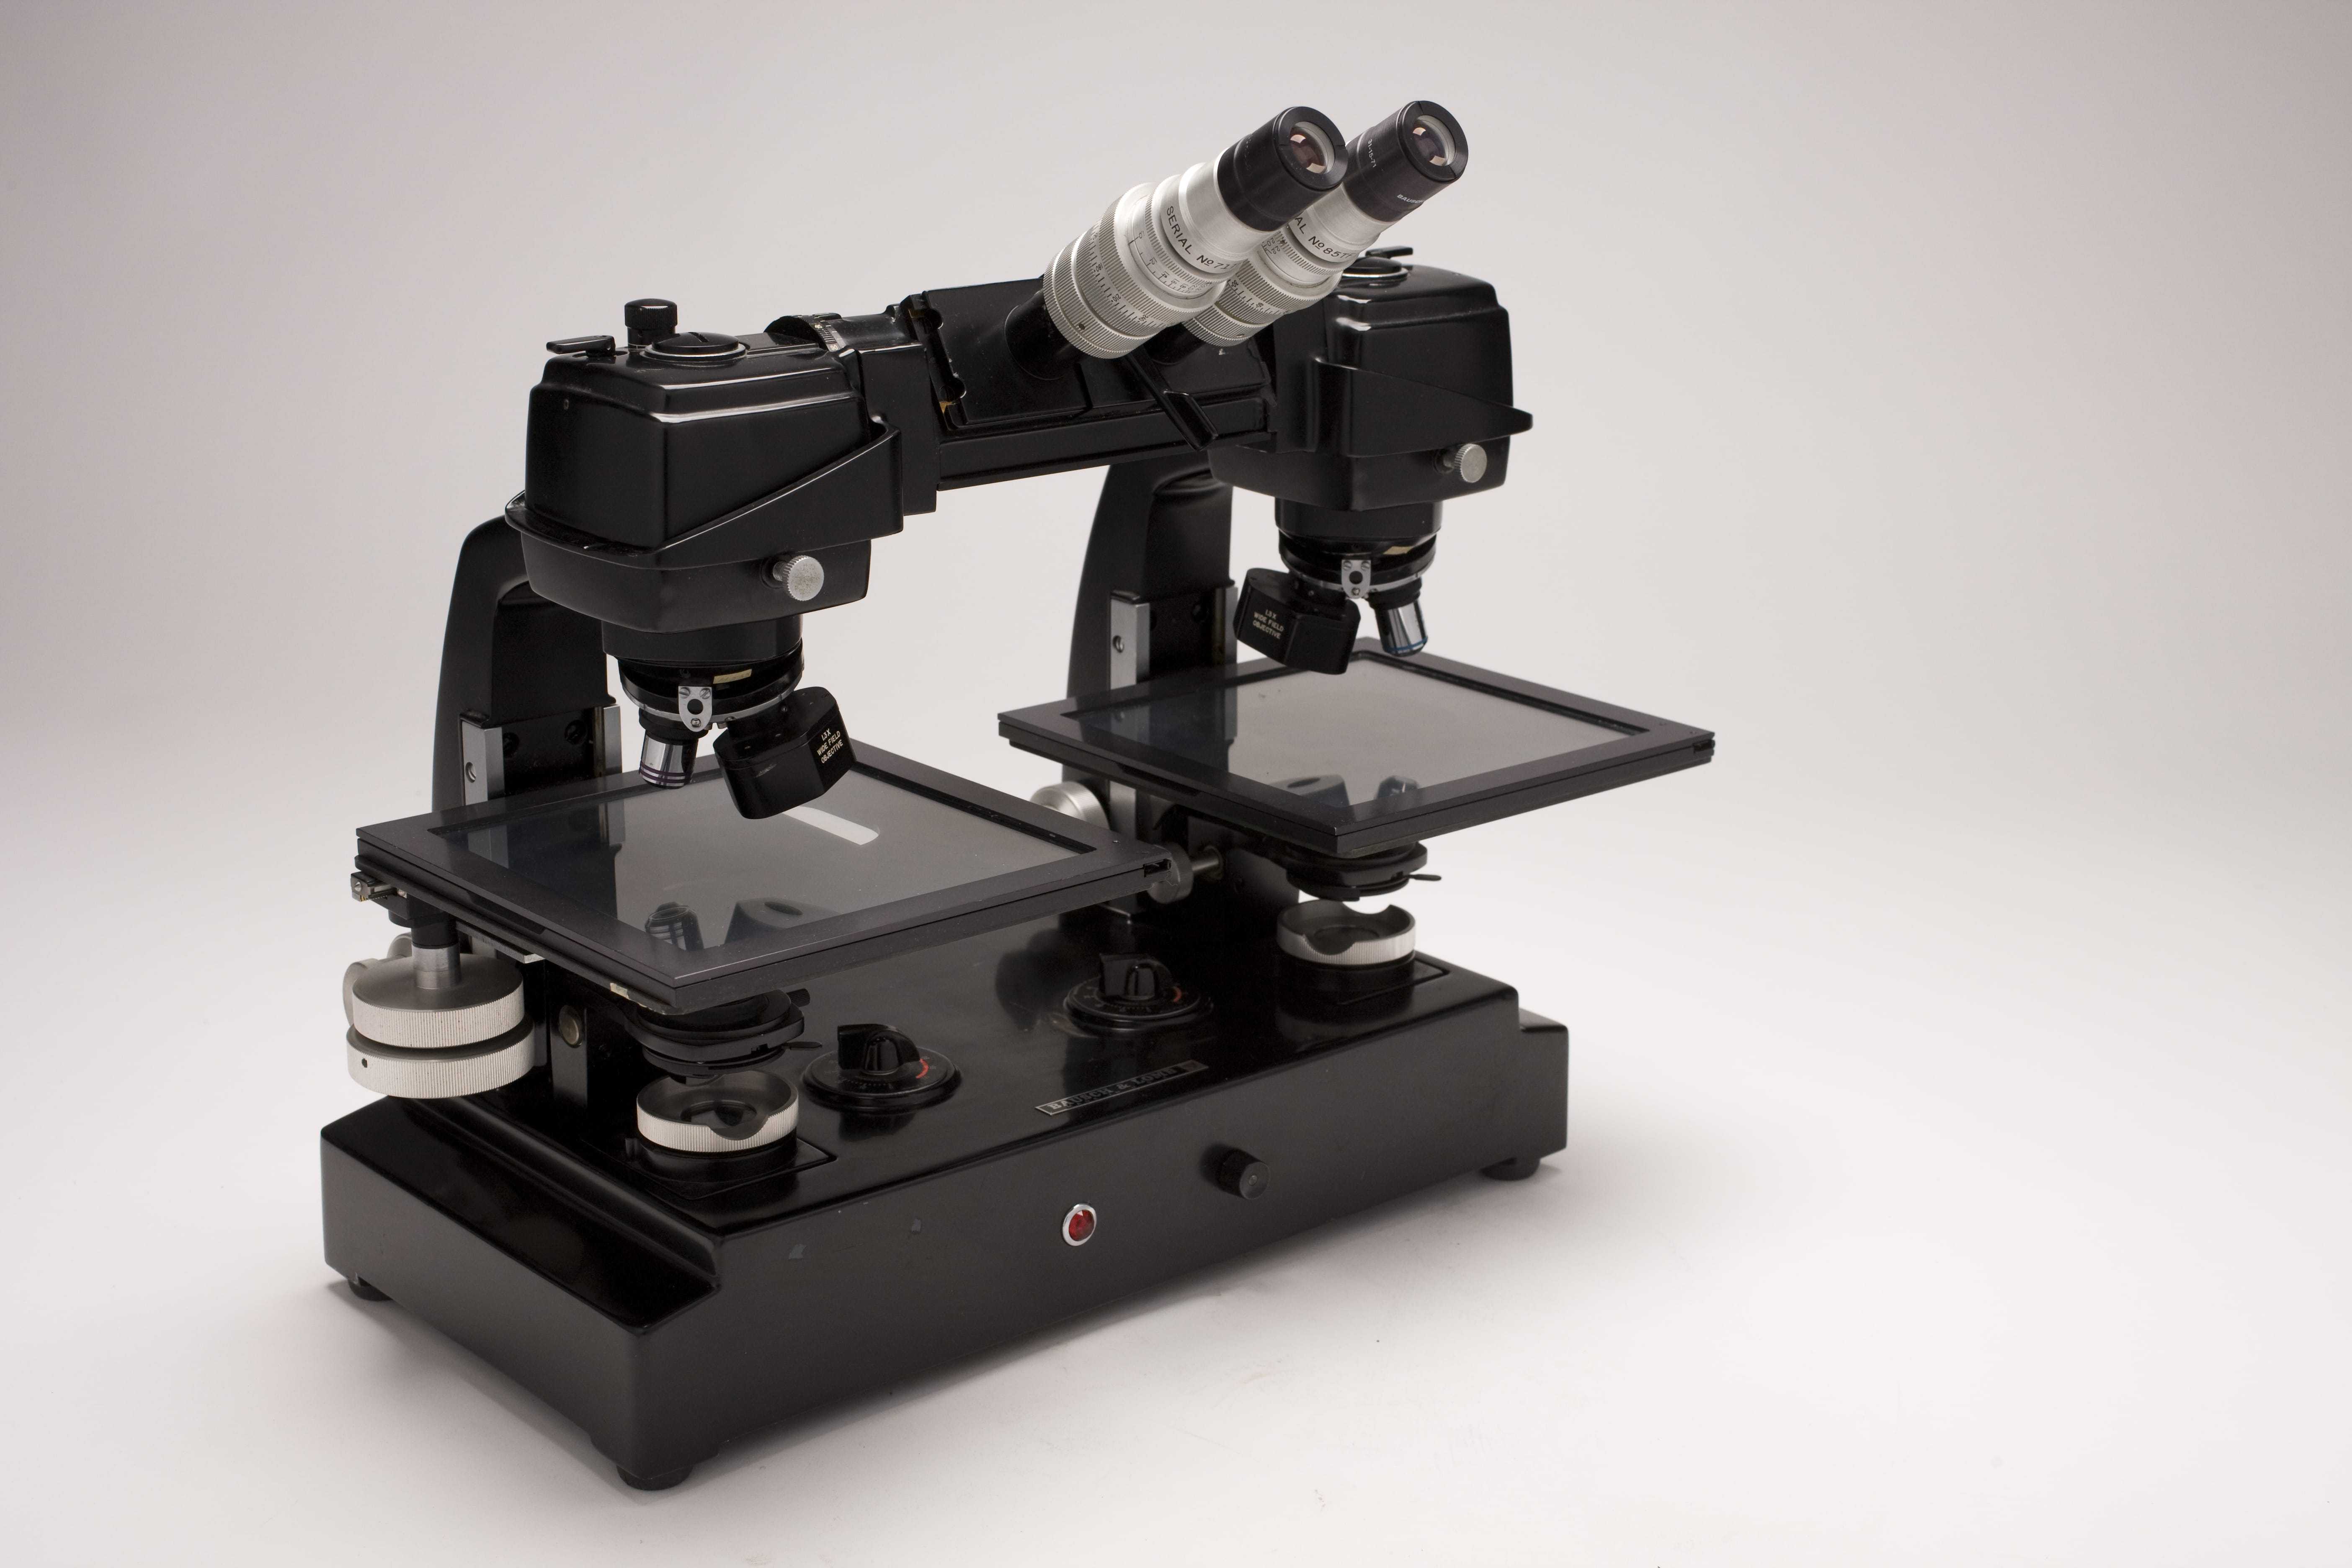 The Dynazoom, a device similar to a microscope but with two eyepieces and stages for examination